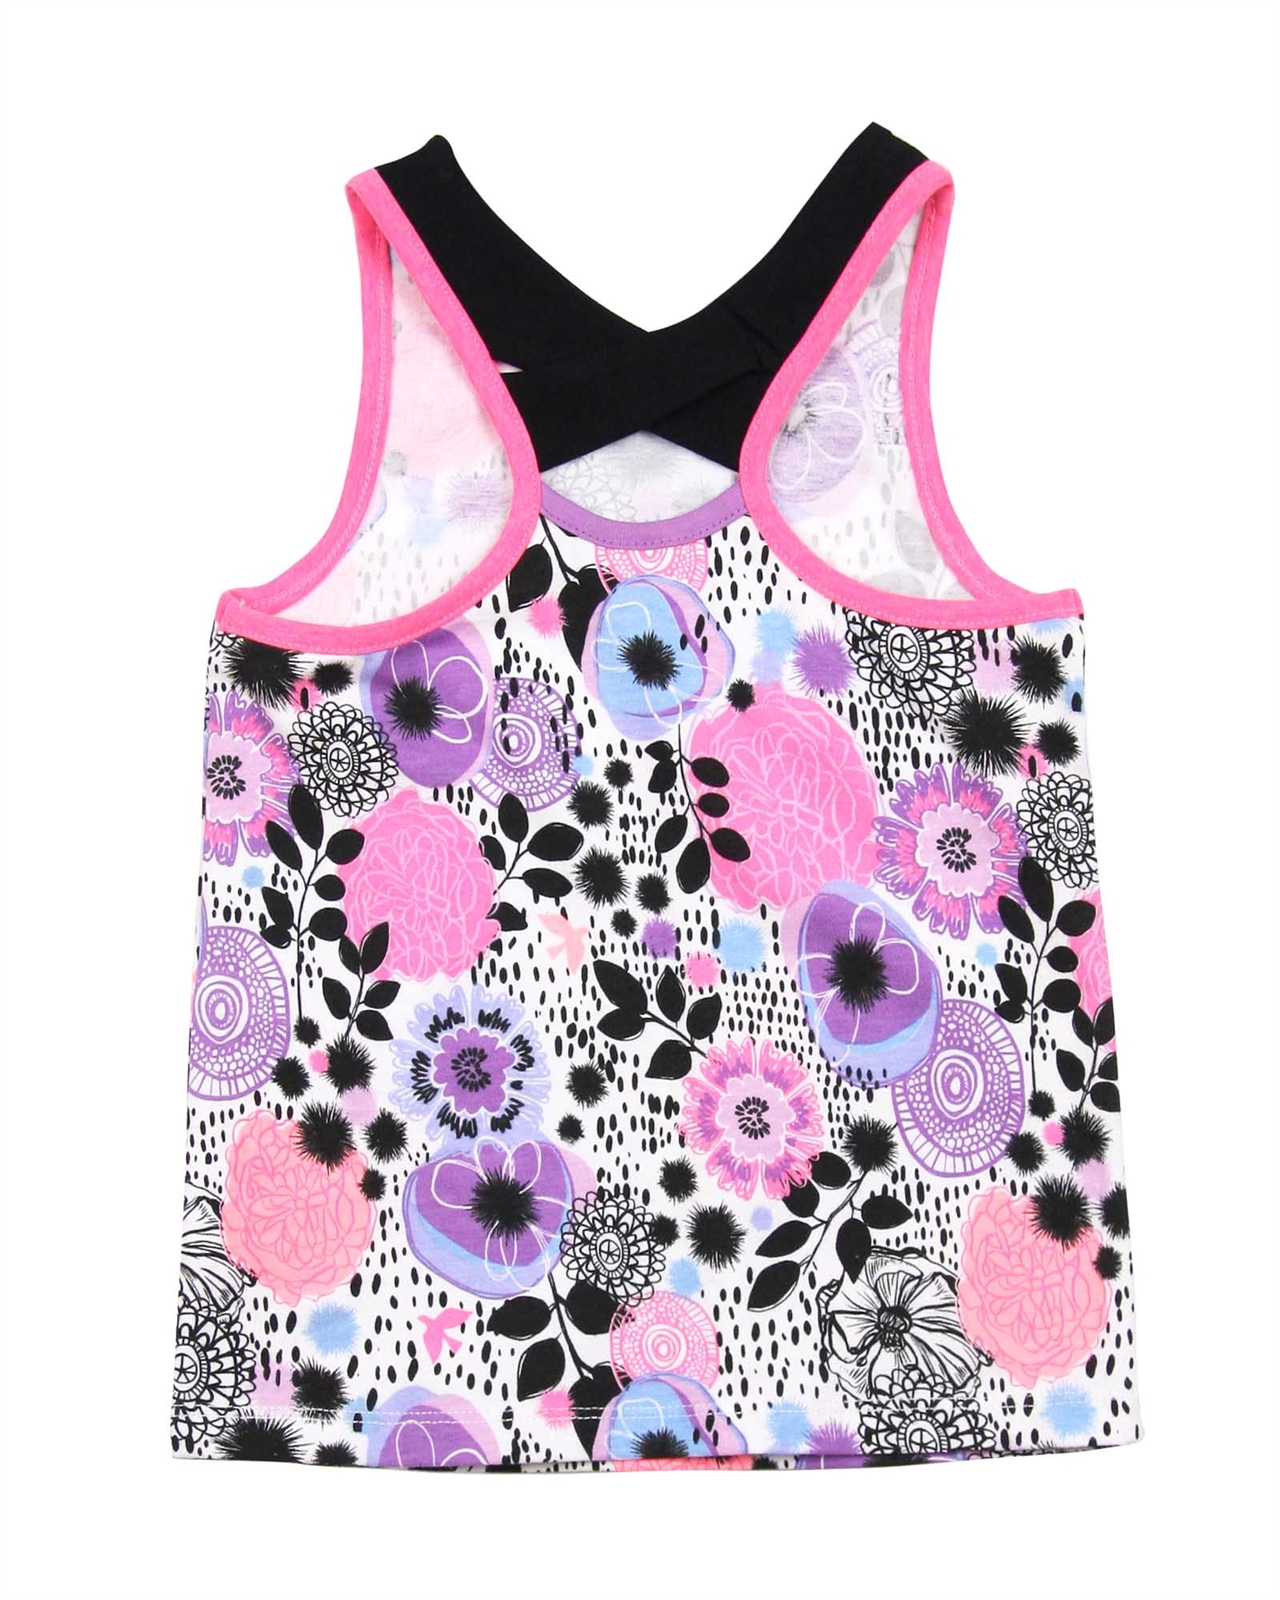 Nano Grils Tank Top in All-over Floral Print